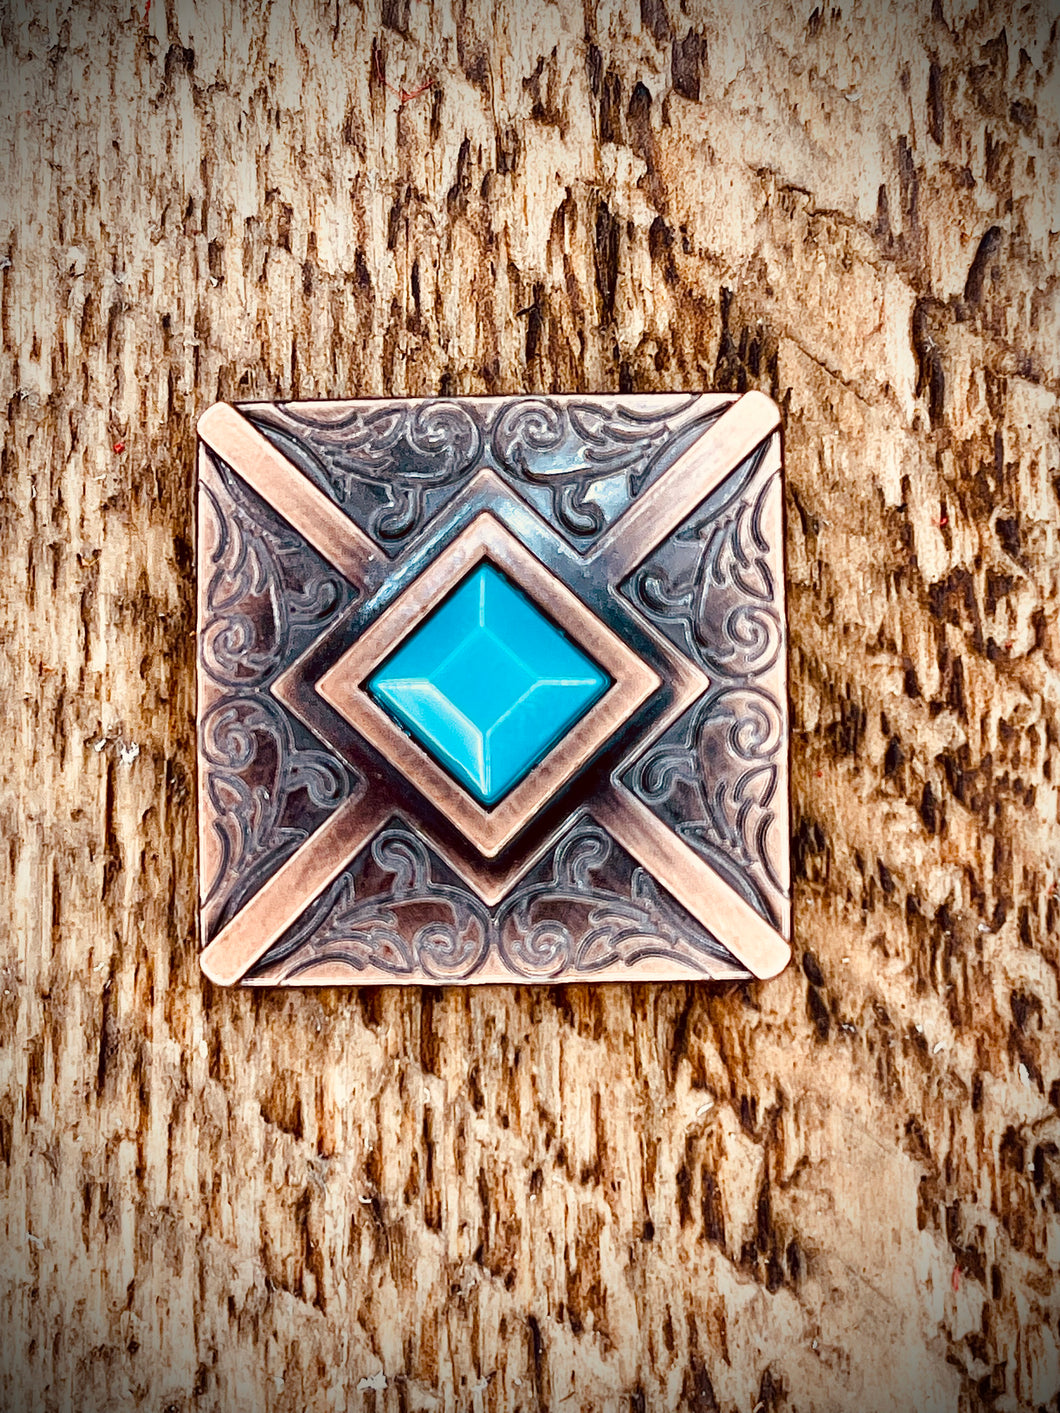 1.5” Copper square concho with turquoise stone